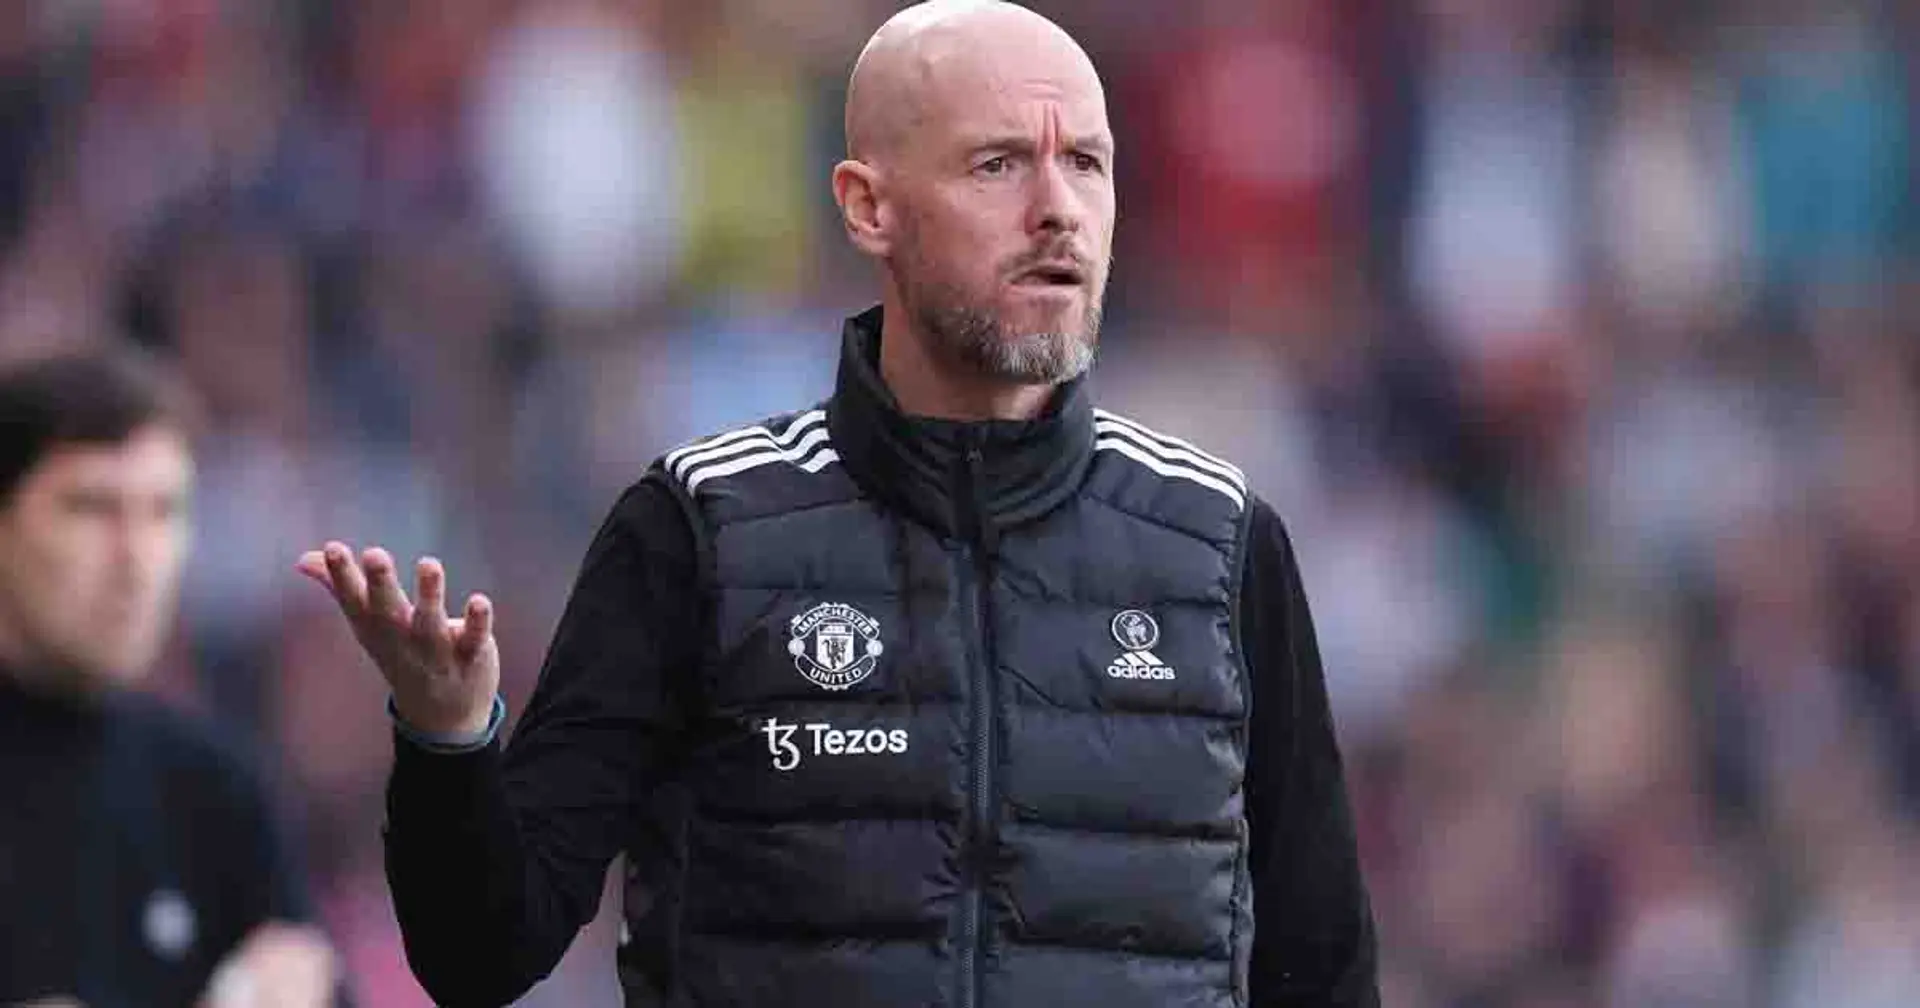 Do you think Ten Hag will succeed at his next club?